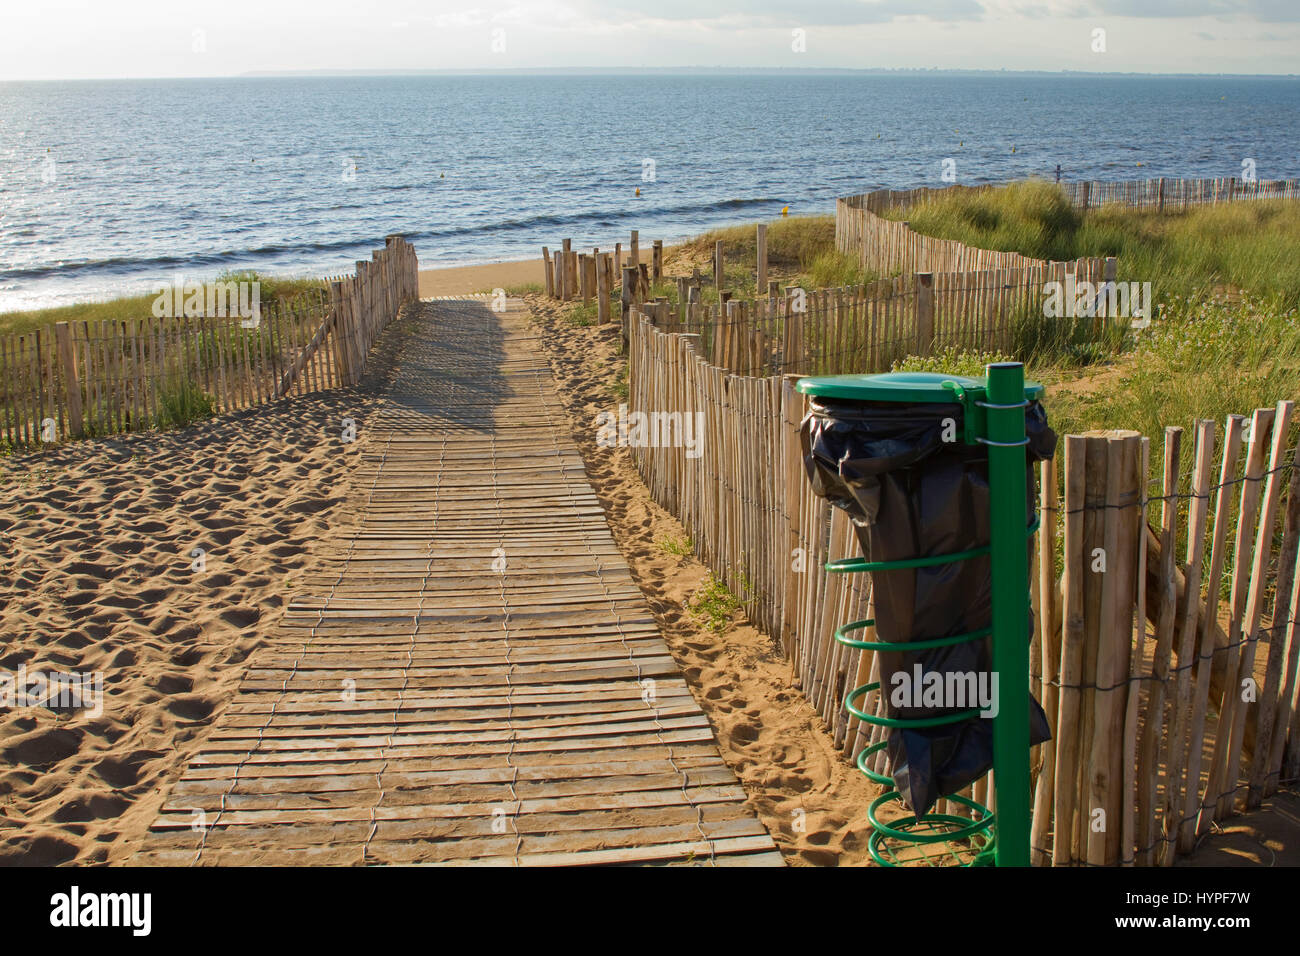 France, North-Western France, Saint-Michel-Chef-Chef, Tharon-plage, access to the beach, dustbin Stock Photo